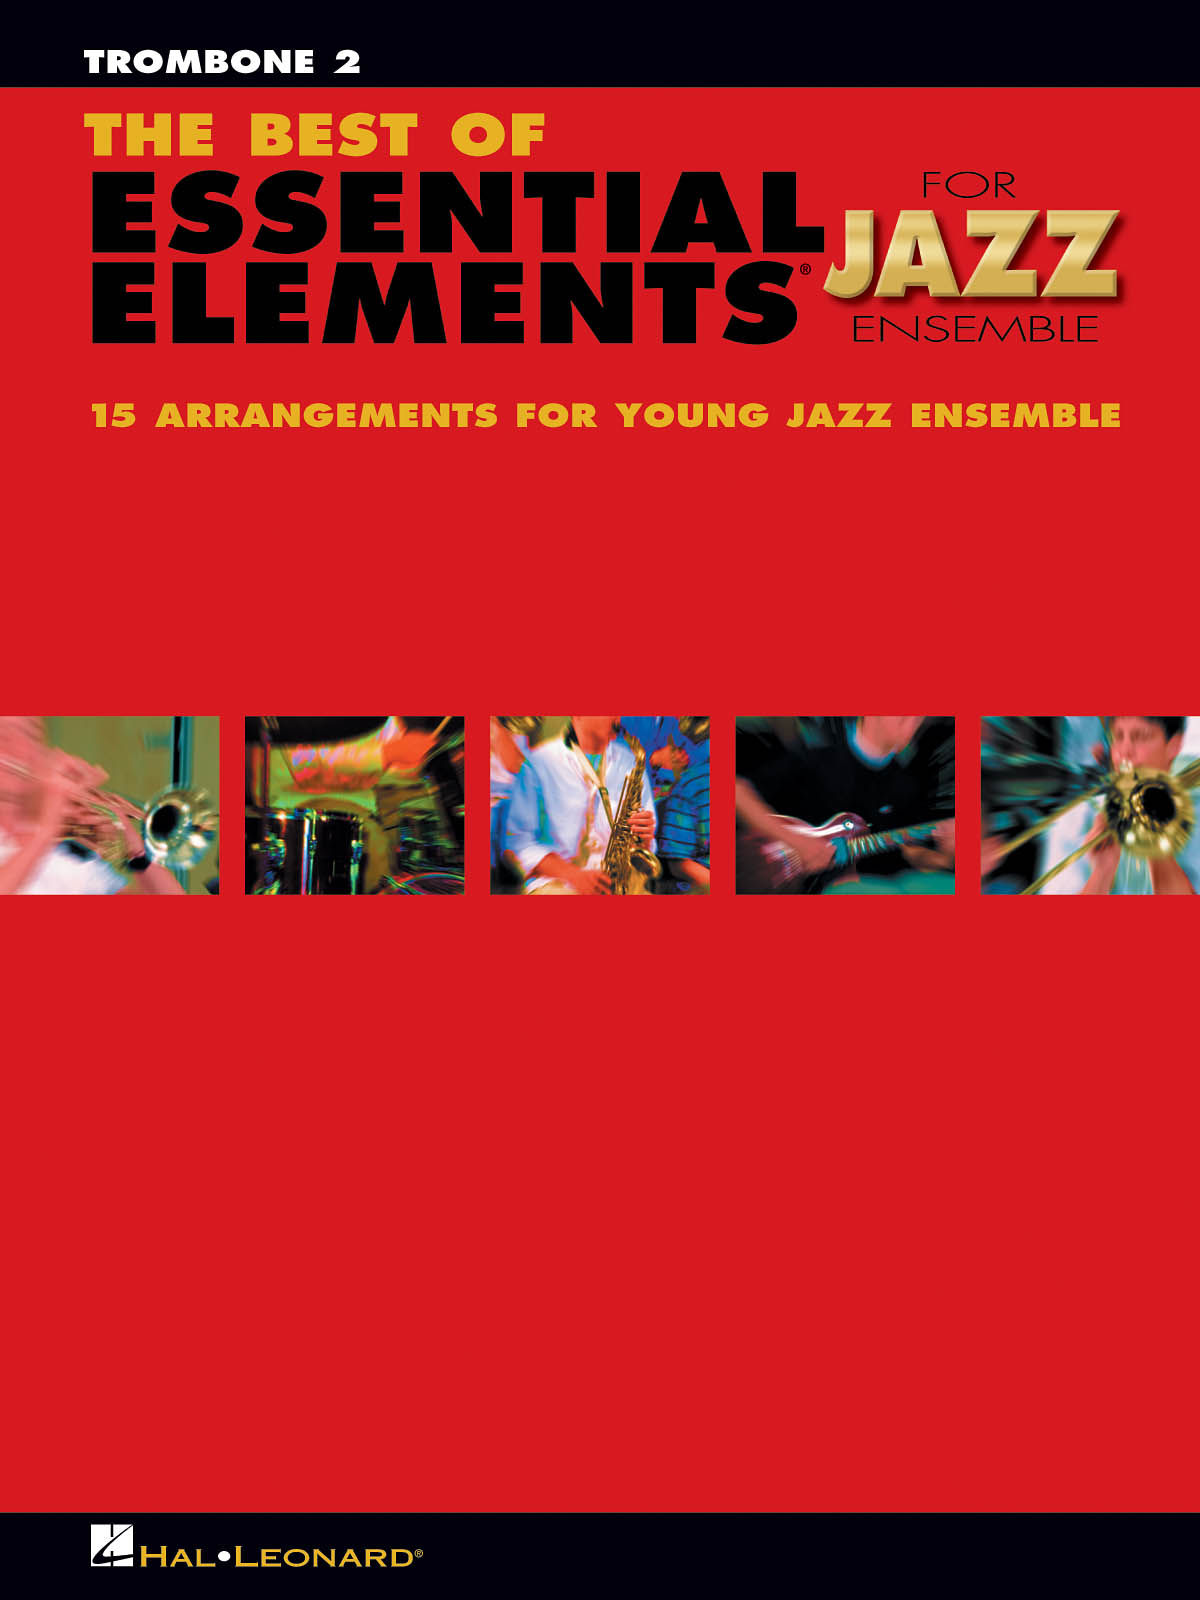 The Best of Essential Elements For Jazz Ensemble (Trombone 2)